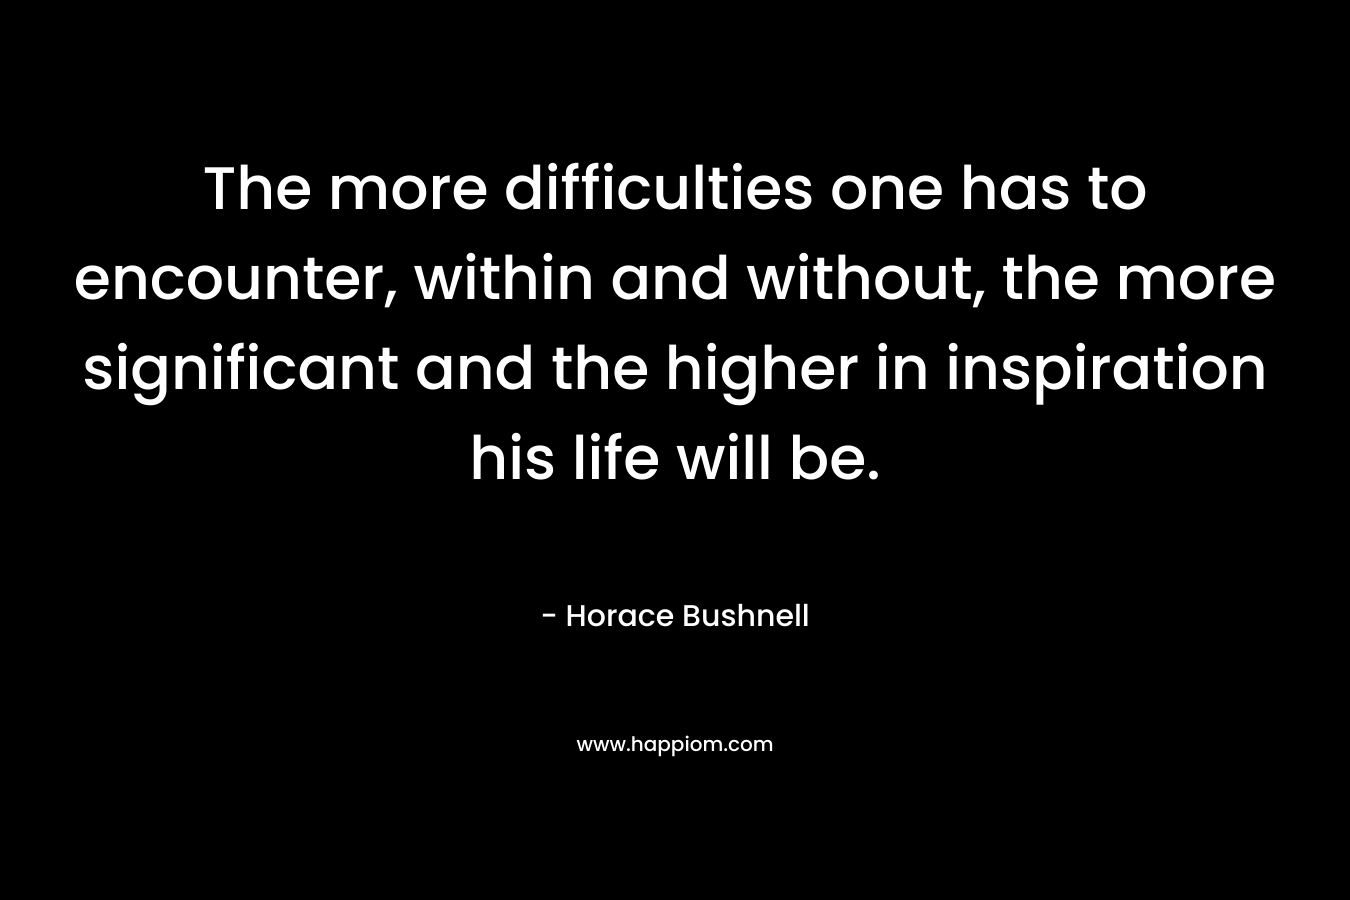 The more difficulties one has to encounter, within and without, the more significant and the higher in inspiration his life will be. – Horace Bushnell